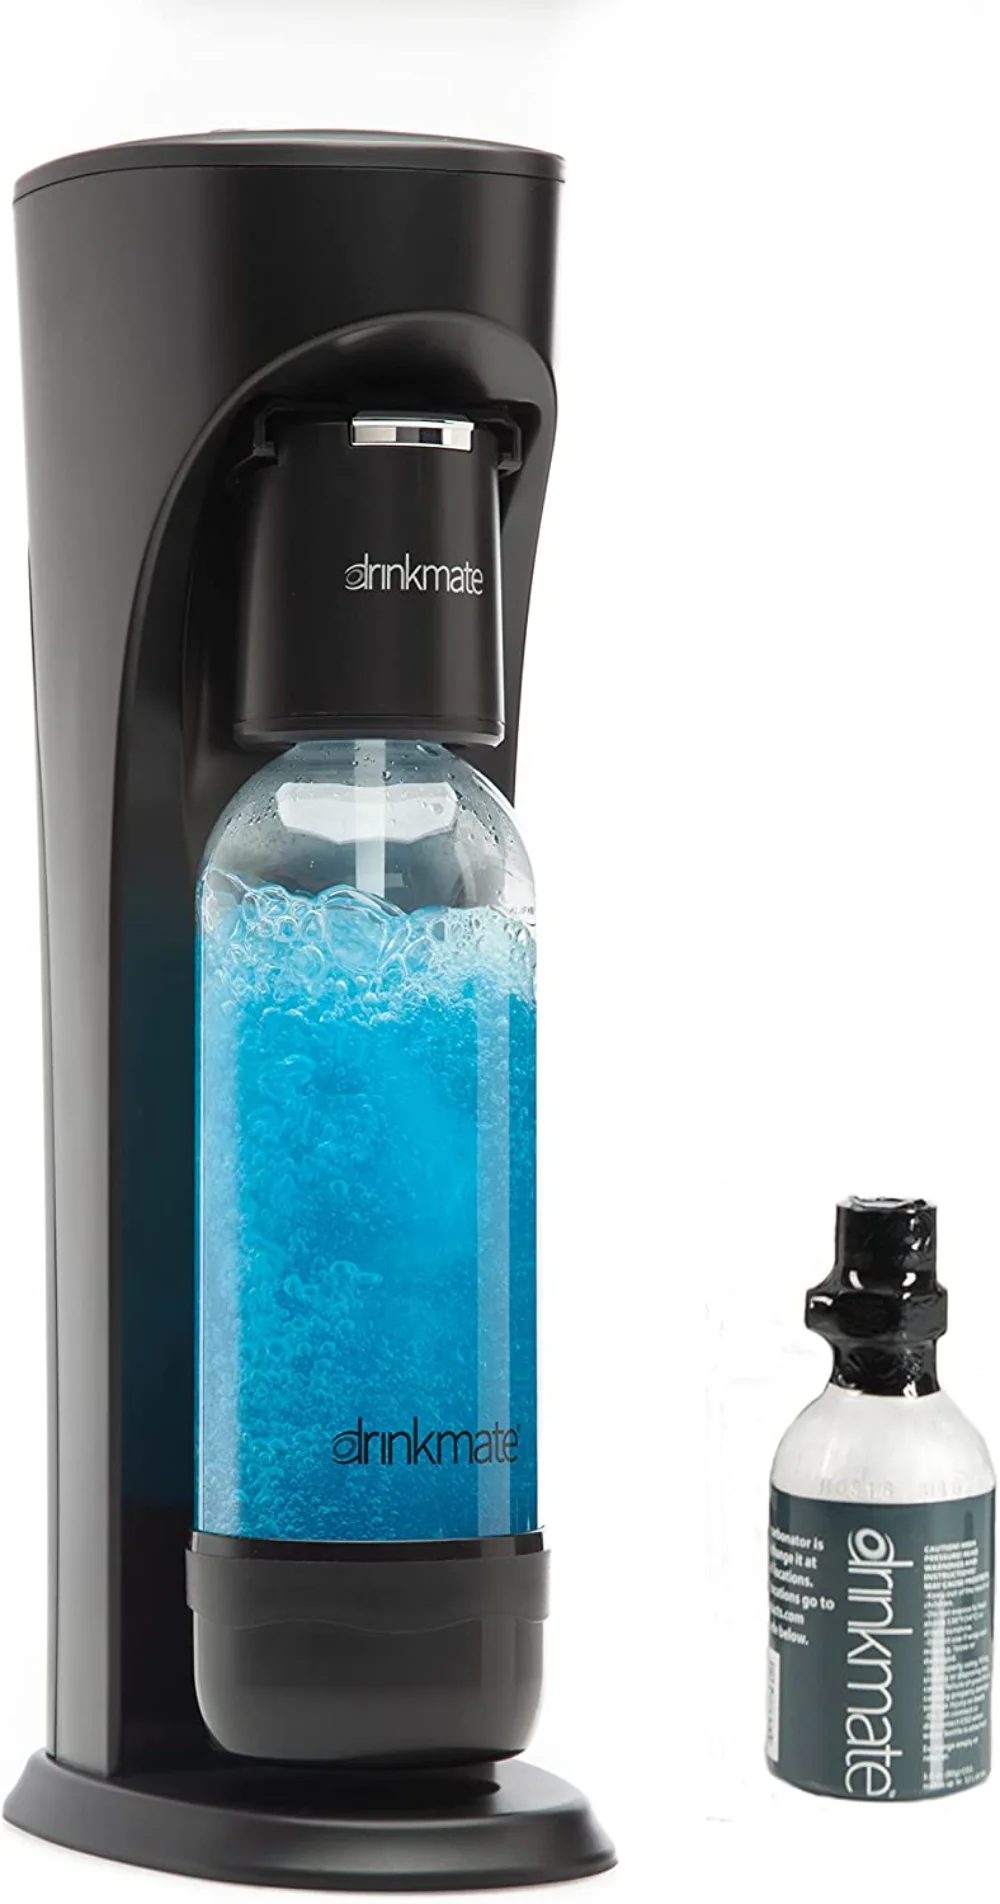 DrinkMate OmniFizz Sparkling Water and Soda Maker, Carbonates Any Drink, with 3 oz CO2 Test Cylinder (Matte Black) lemonda smart p30 1 28 inch full circle full touch smart watch air pump airbag type true blood pressure test body temperature heart rate measurement ip65 waterproof black leather